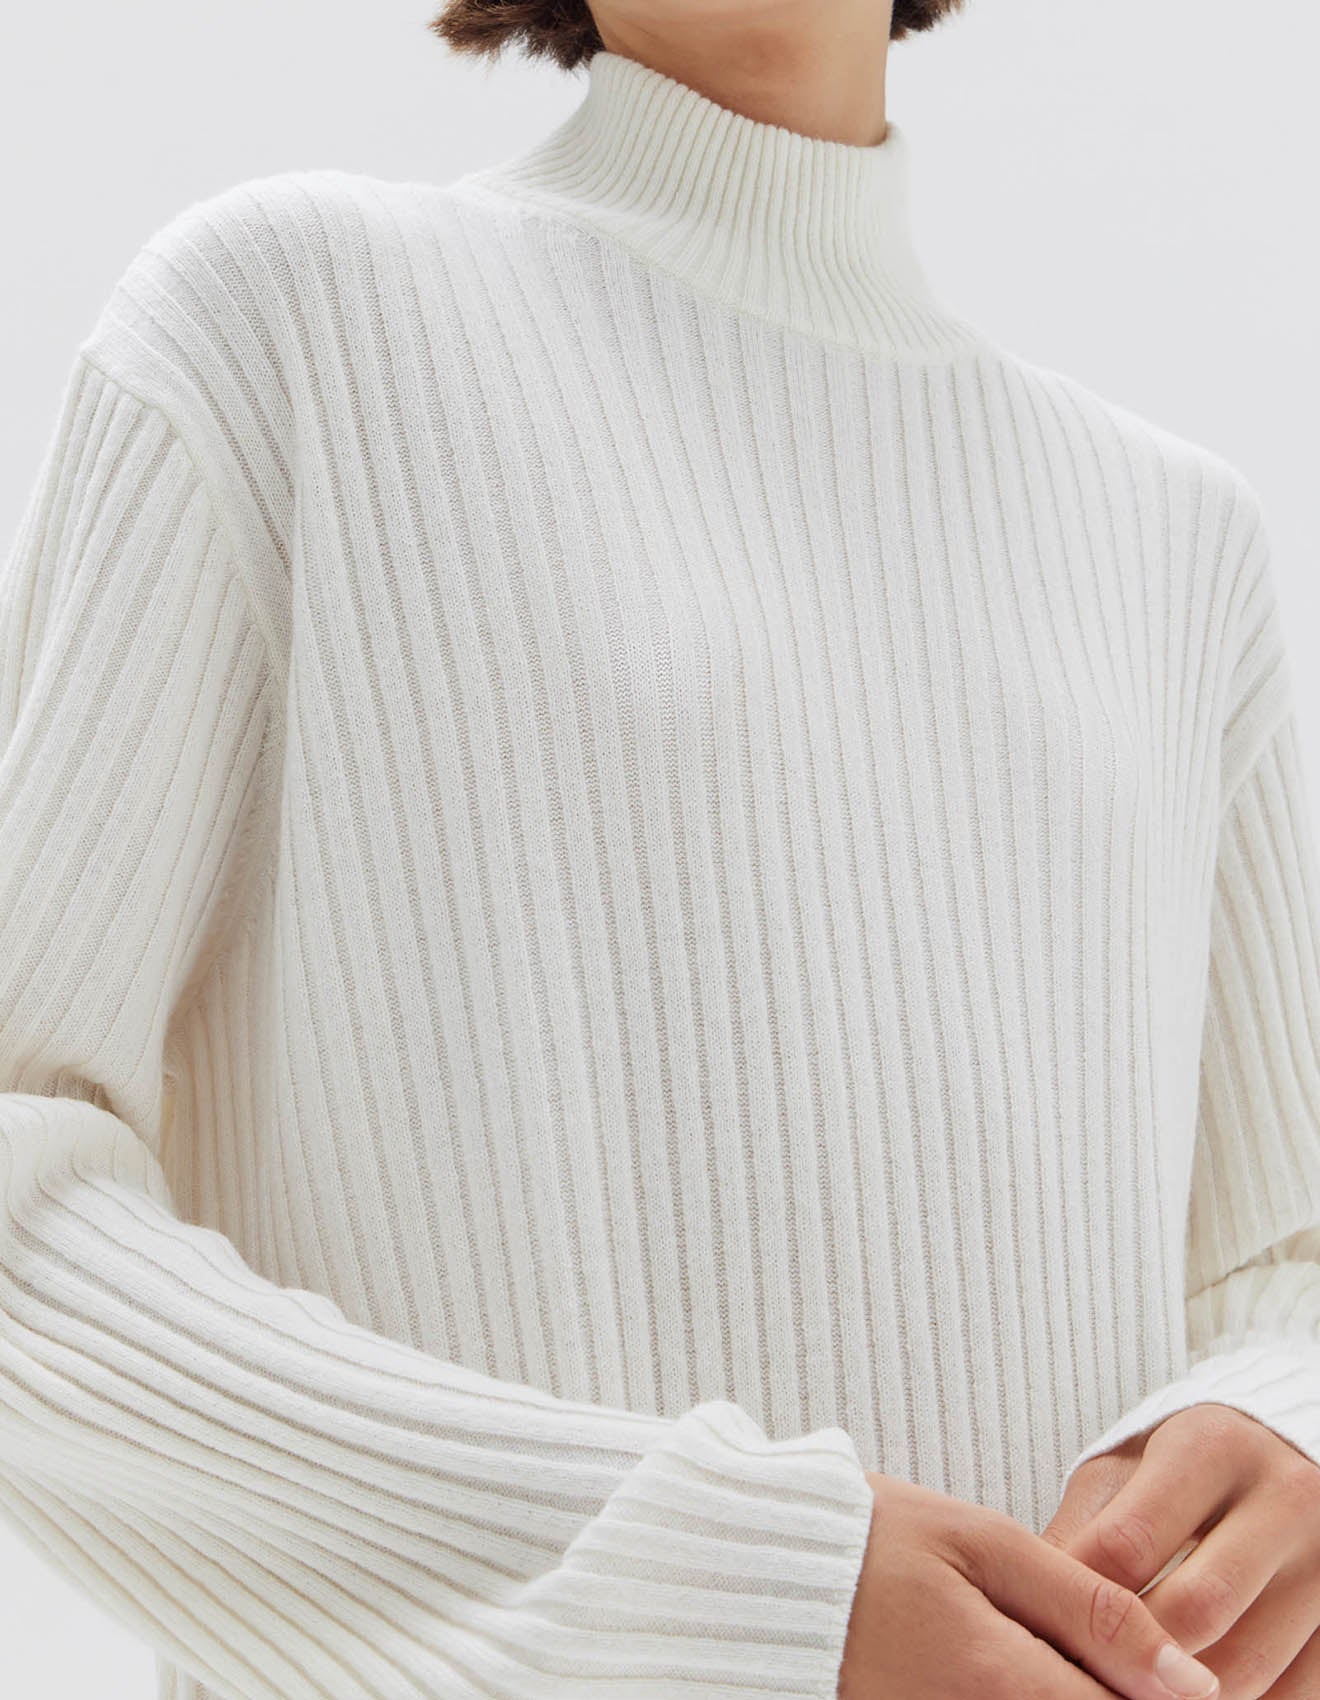 Assembly Label | Pearl Roll Neck Knit Dress - Cream